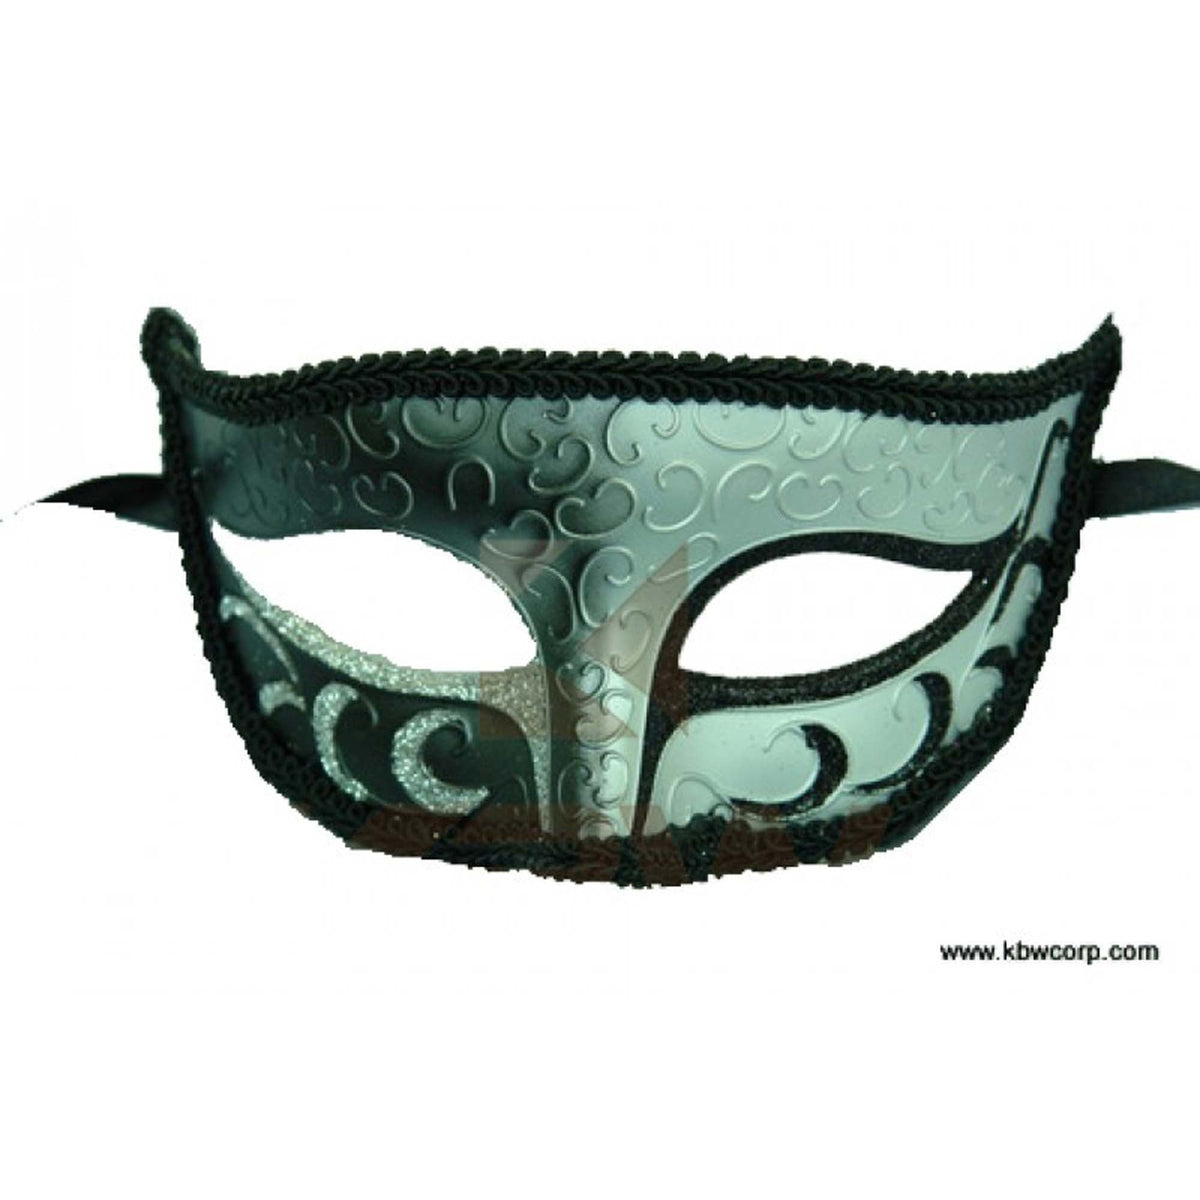 KBW GLOBAL CORP Costume Accessories Venitian Mask Black and Silver, 1 count 831687021305